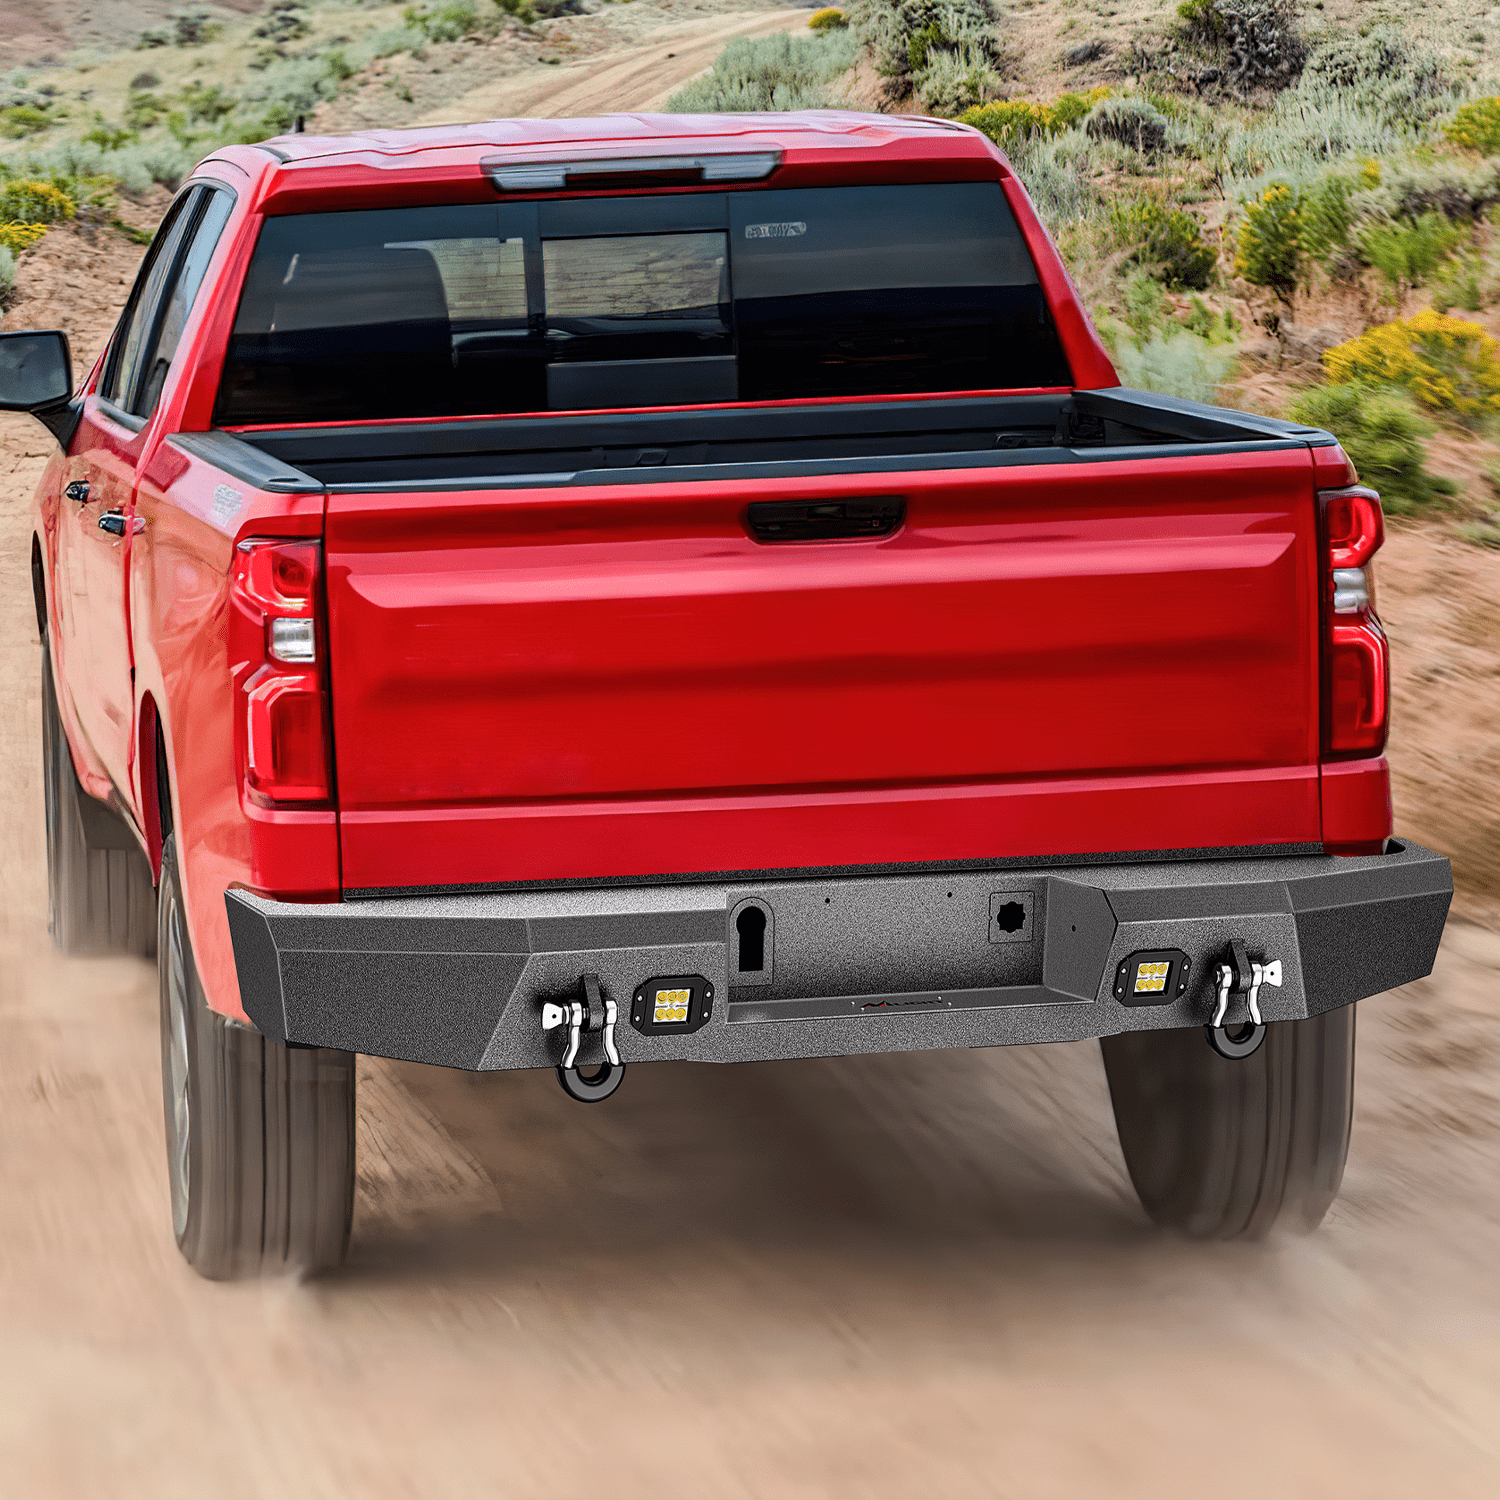 Rear Step Bumper for 2014-2018 Chevy Silverado/GMC Sierra 1500 Pickup Trucks Textured Solid Steel with 2 Upgraded Flood 18W LED Lights D-Rings Nilight